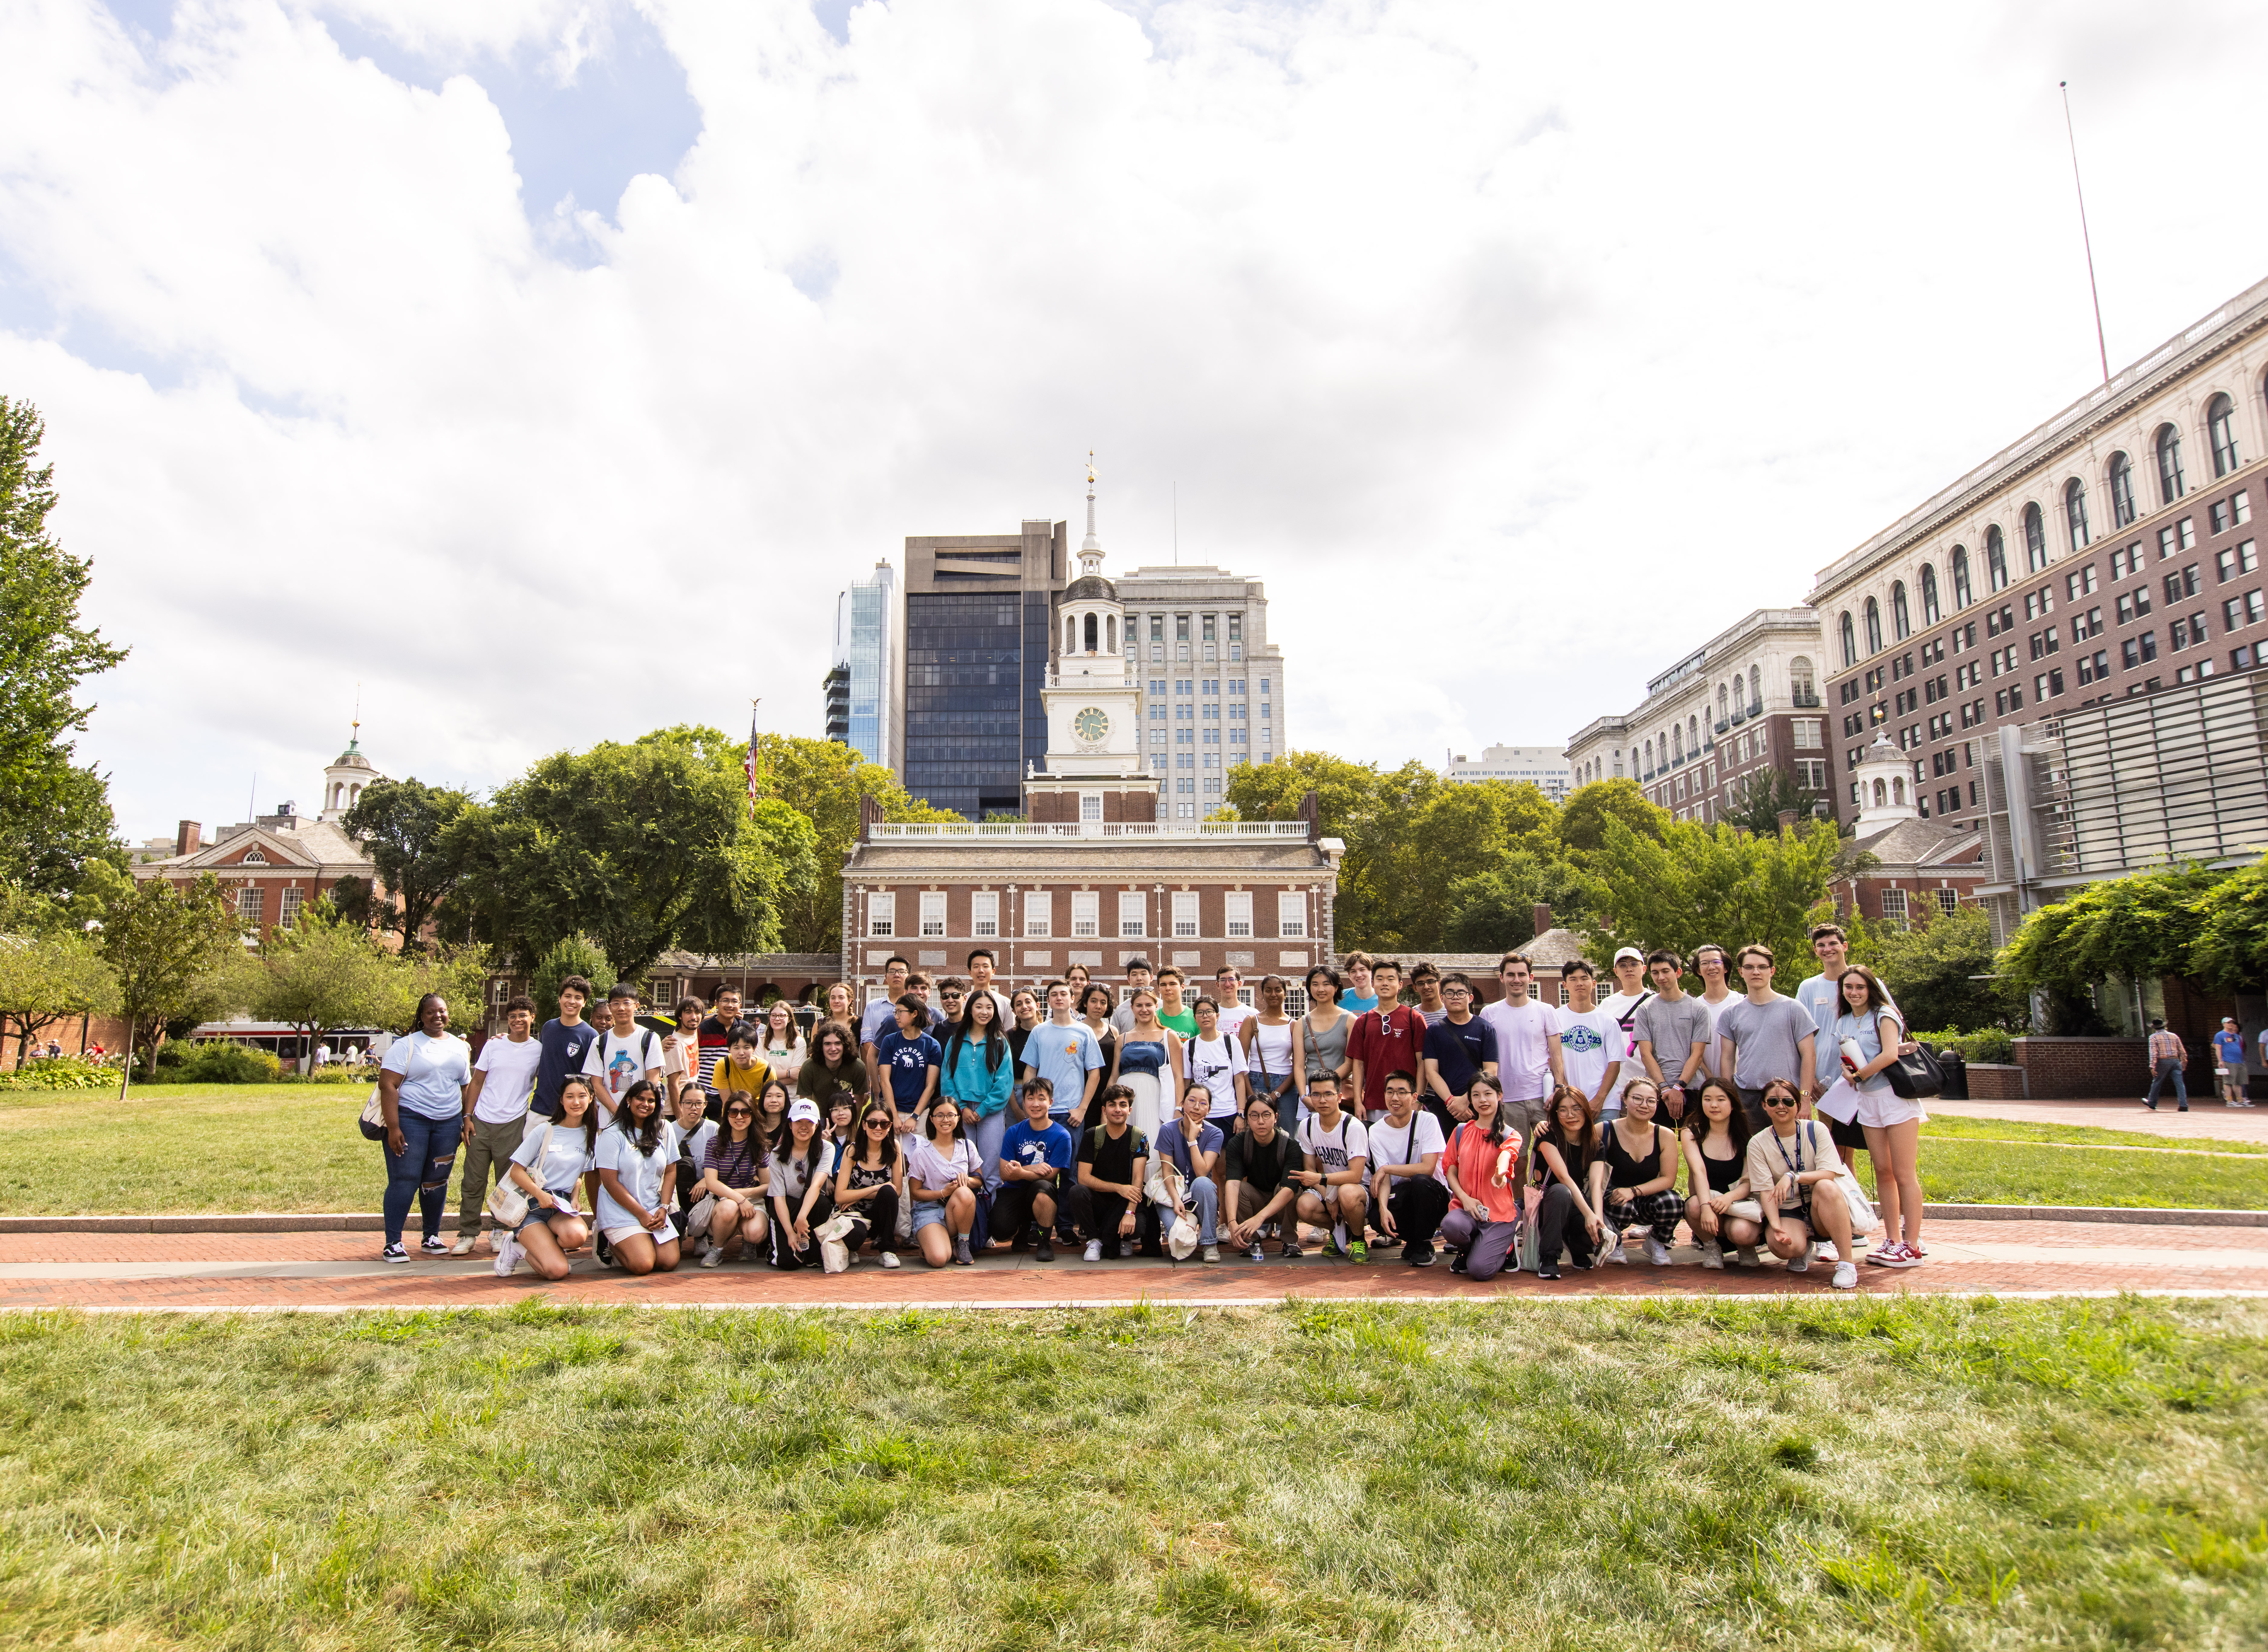 Students in front of the Independence Hall during PennTracks Walking Tour